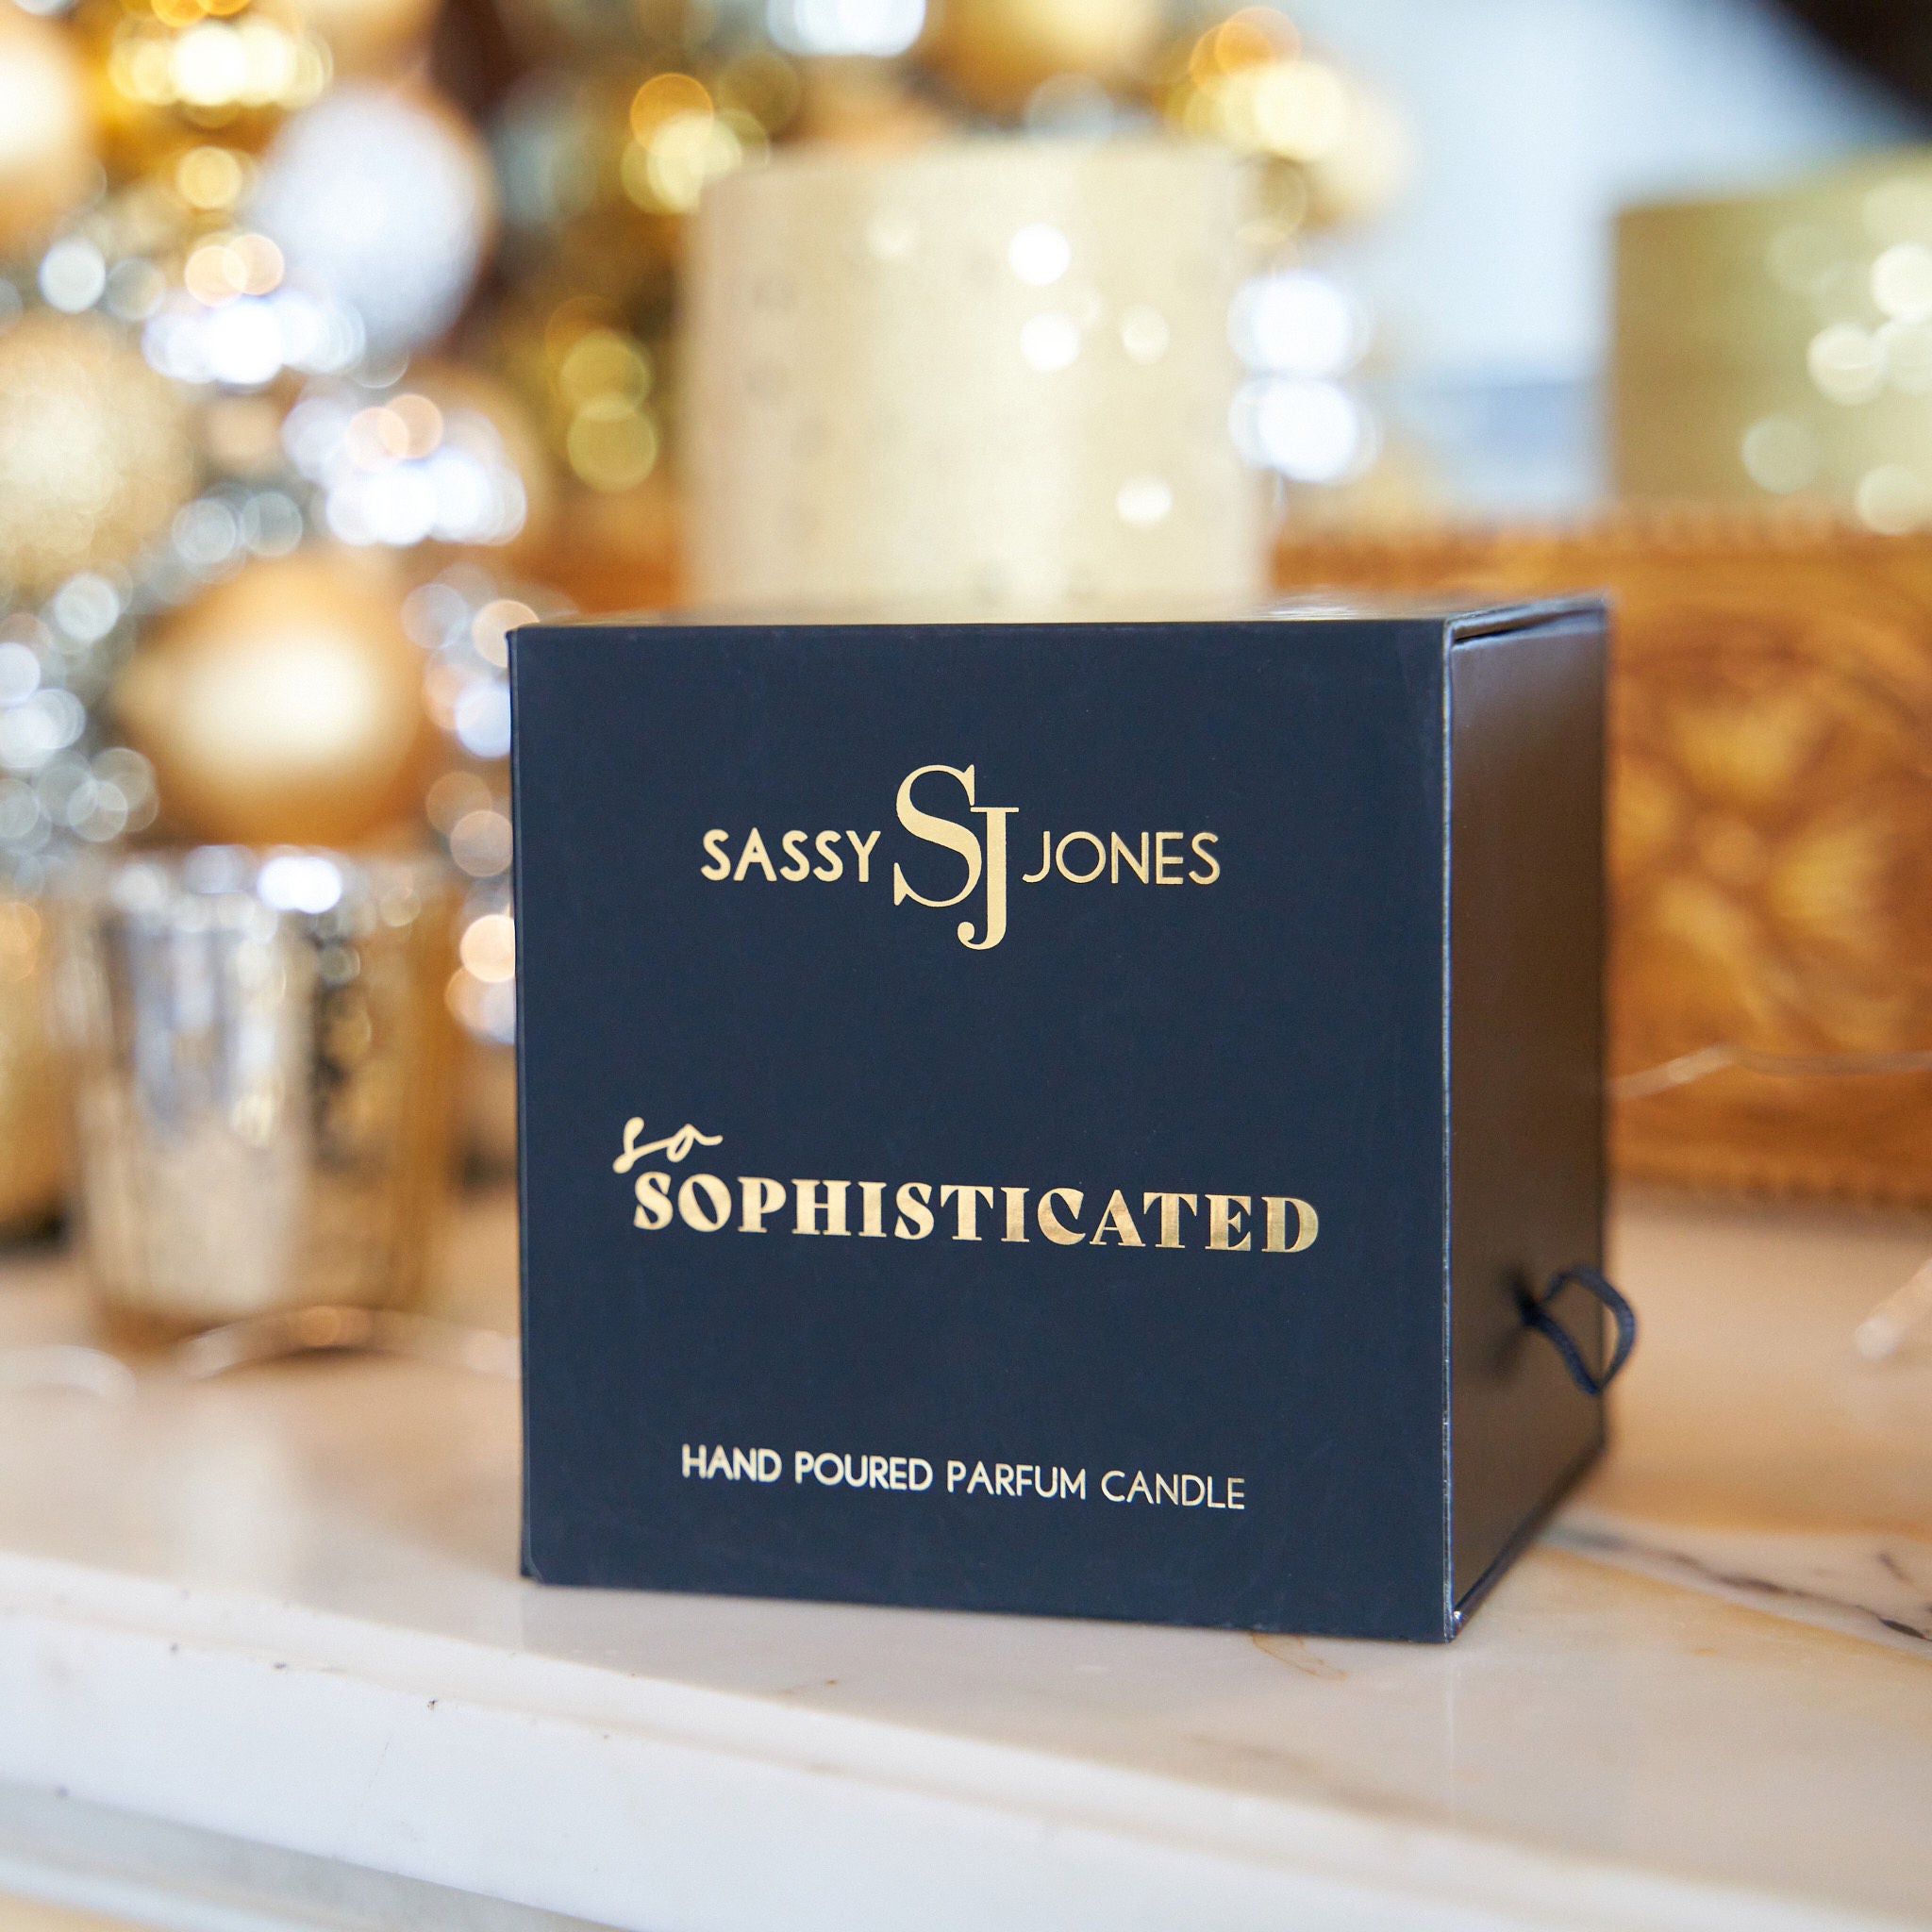 So Sophisticated Candle - Sassy Jones,musk-scented, soy candle, scent therapy, aromatheraphy